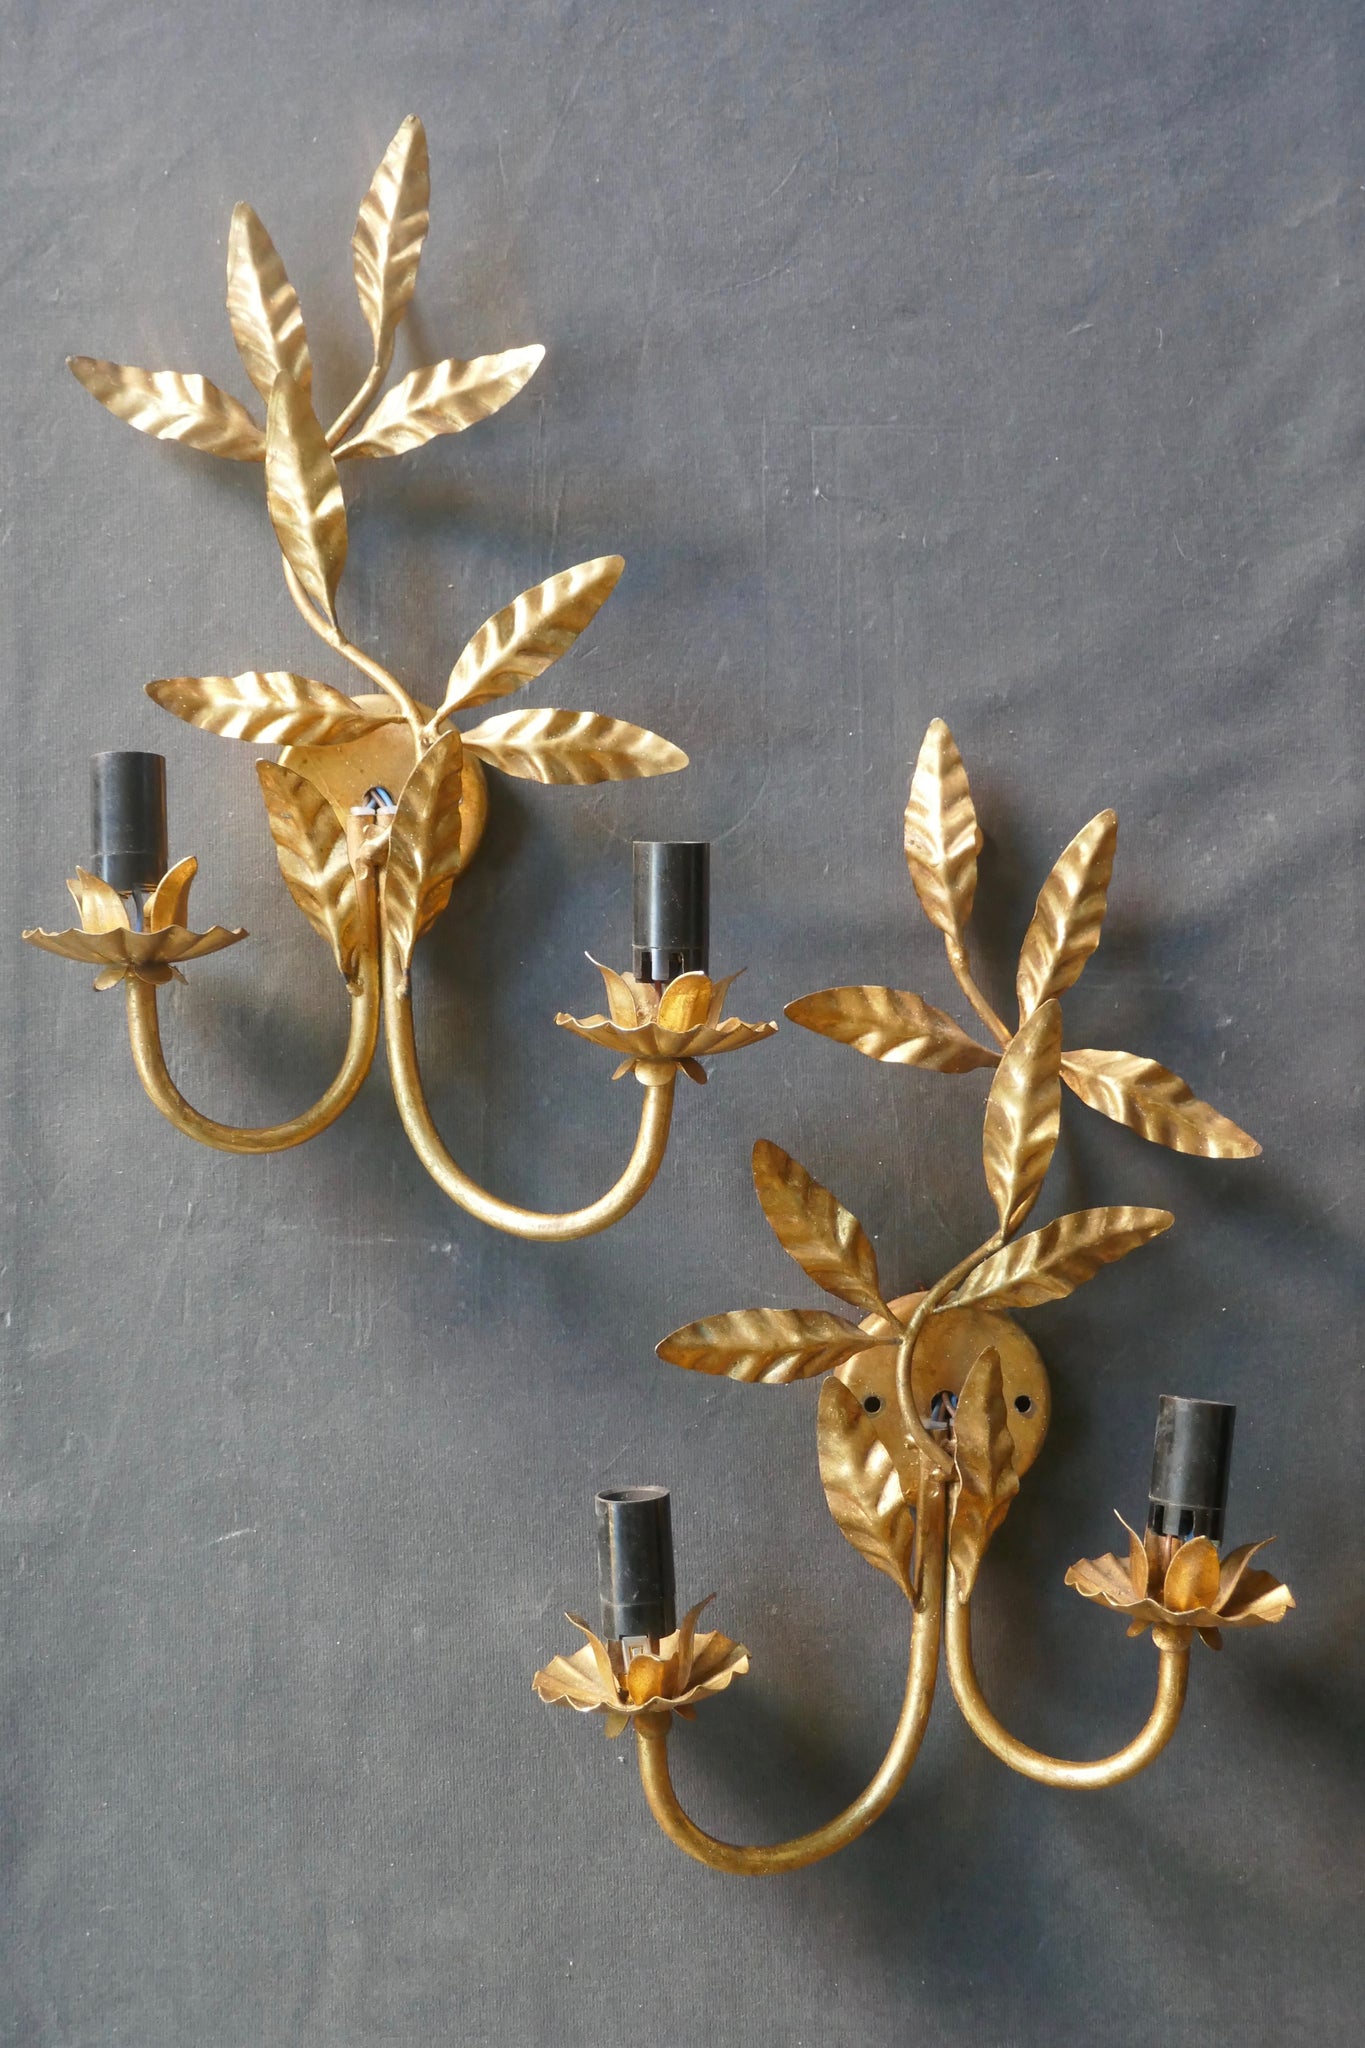 Pair of decorative Italian wall lights with naturalistic leaf decorations.